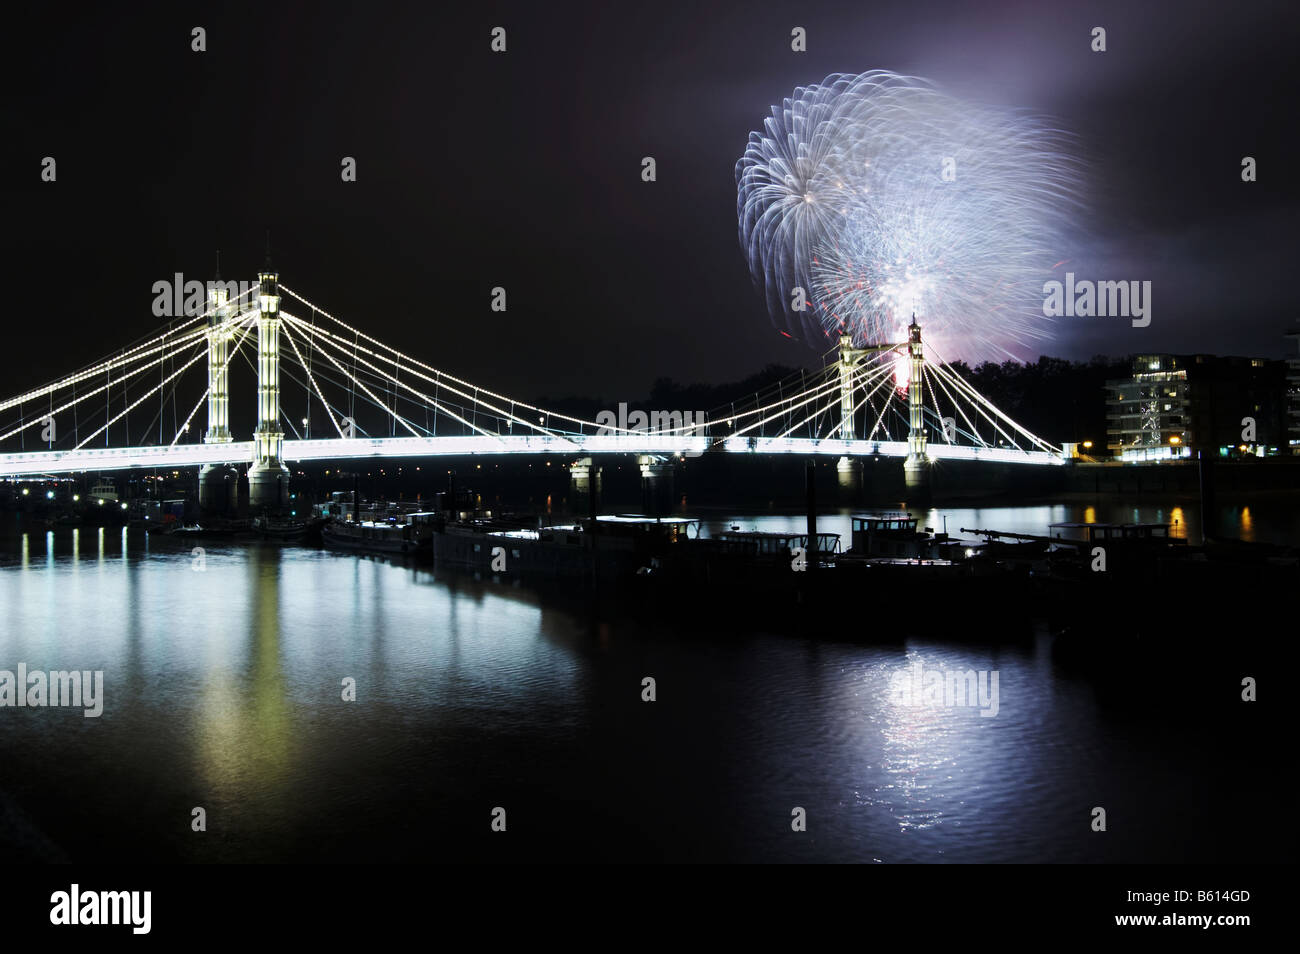 The Albert Bridge in Chelsea London lit up at night with the Battersea Park fireworks show taking place in the background Stock Photo